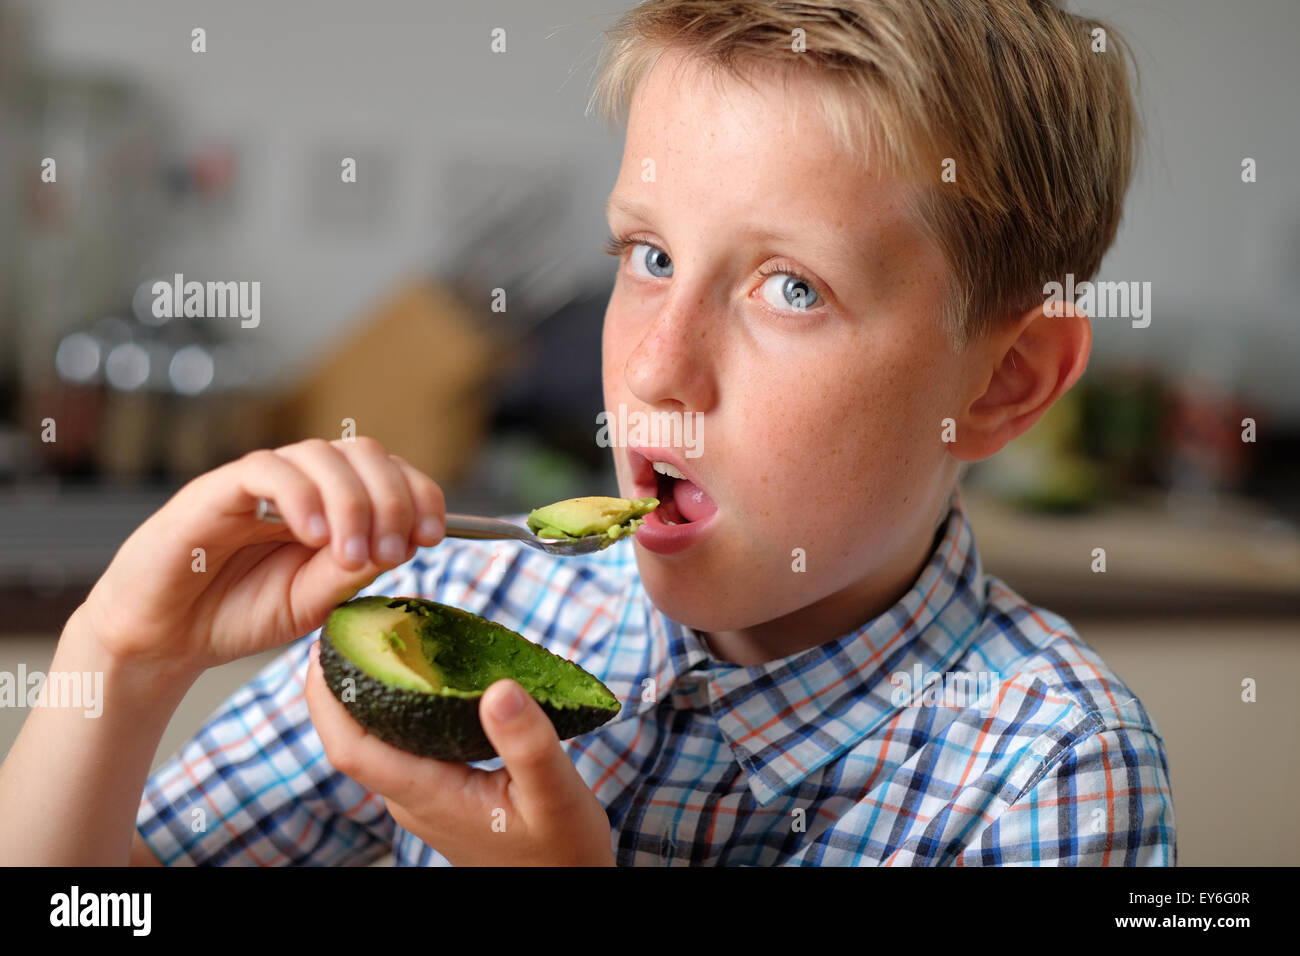 A child eating an avocado with a spoon as a healthy snack Stock Photo